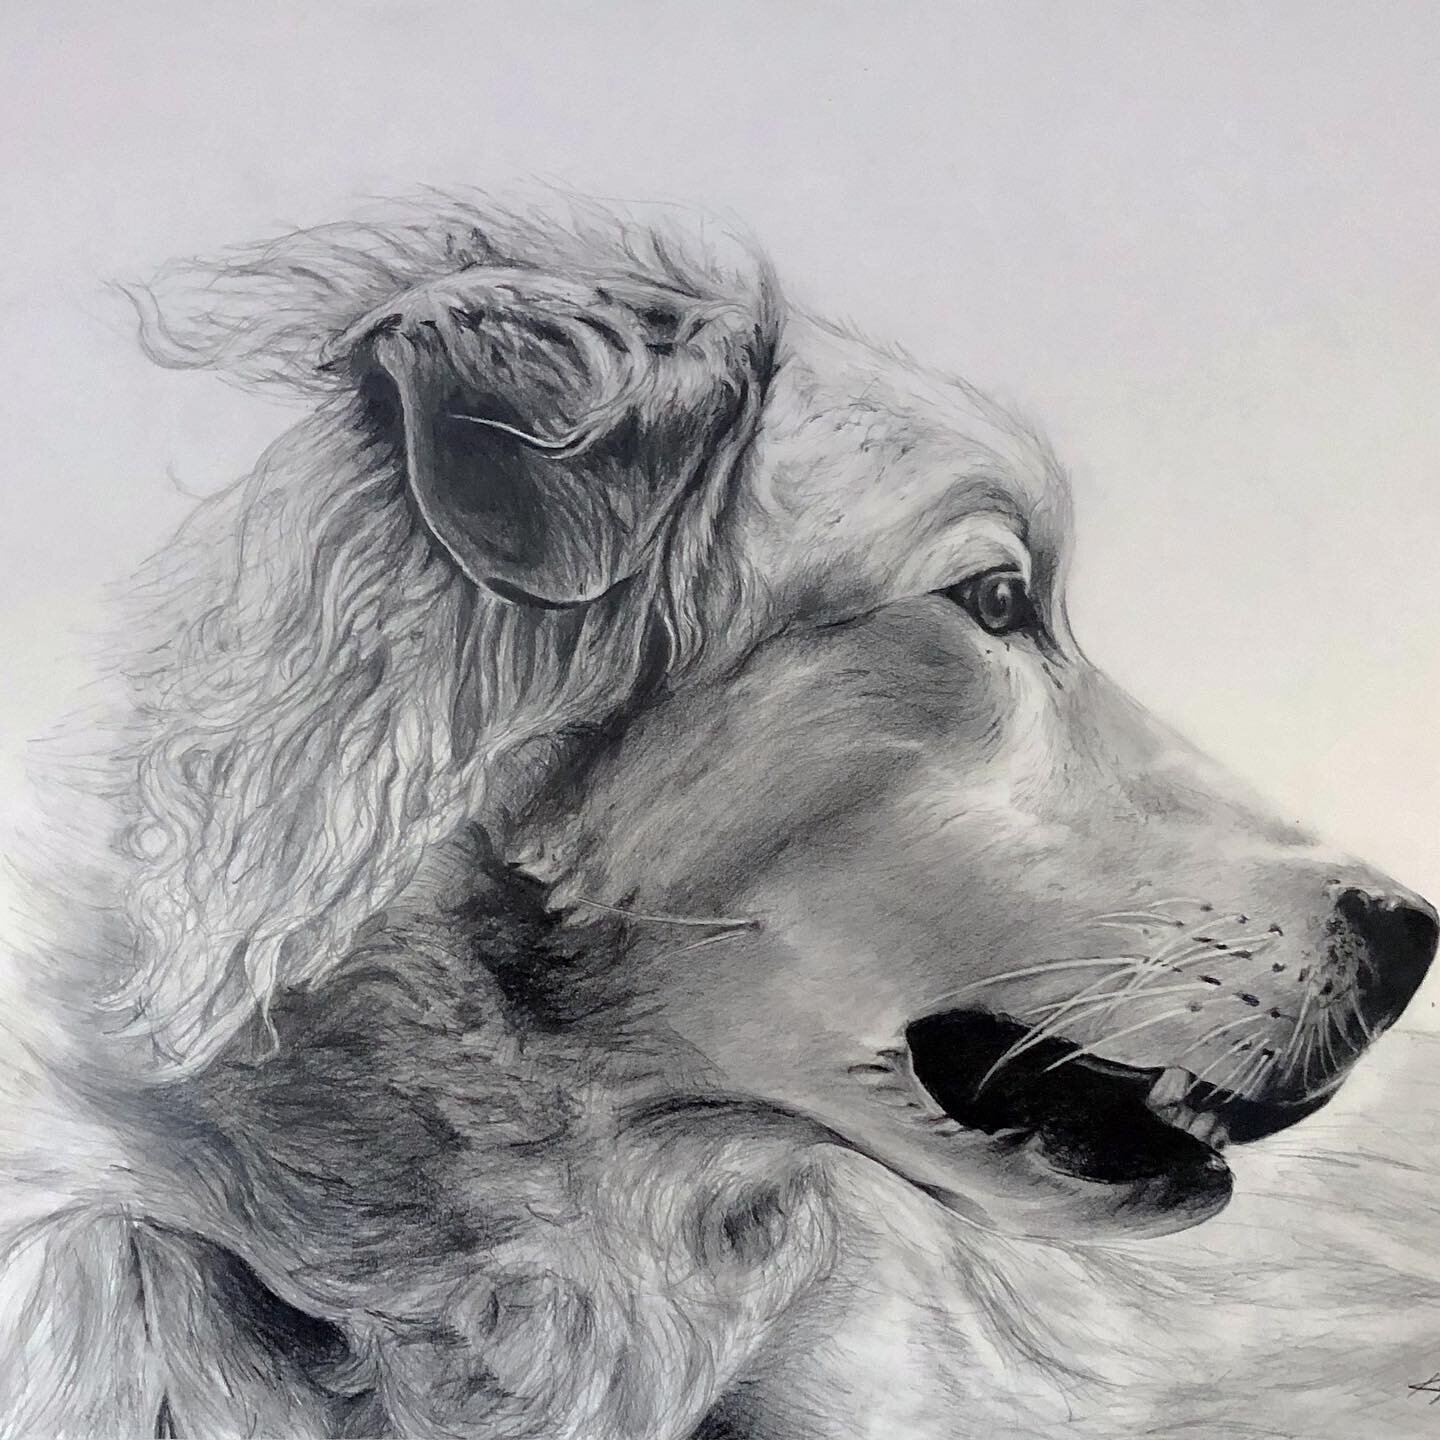 I love doing pet portraits. Pencil on paper. DM me if you want one of your furry friend!

#petsofinstagram #petportrait #portraitdrawing #art #artistsoninstagram #dogsofinstagram #dogportrait #doglovers #draw #pencildrawing #dogproducts #giftideas #o